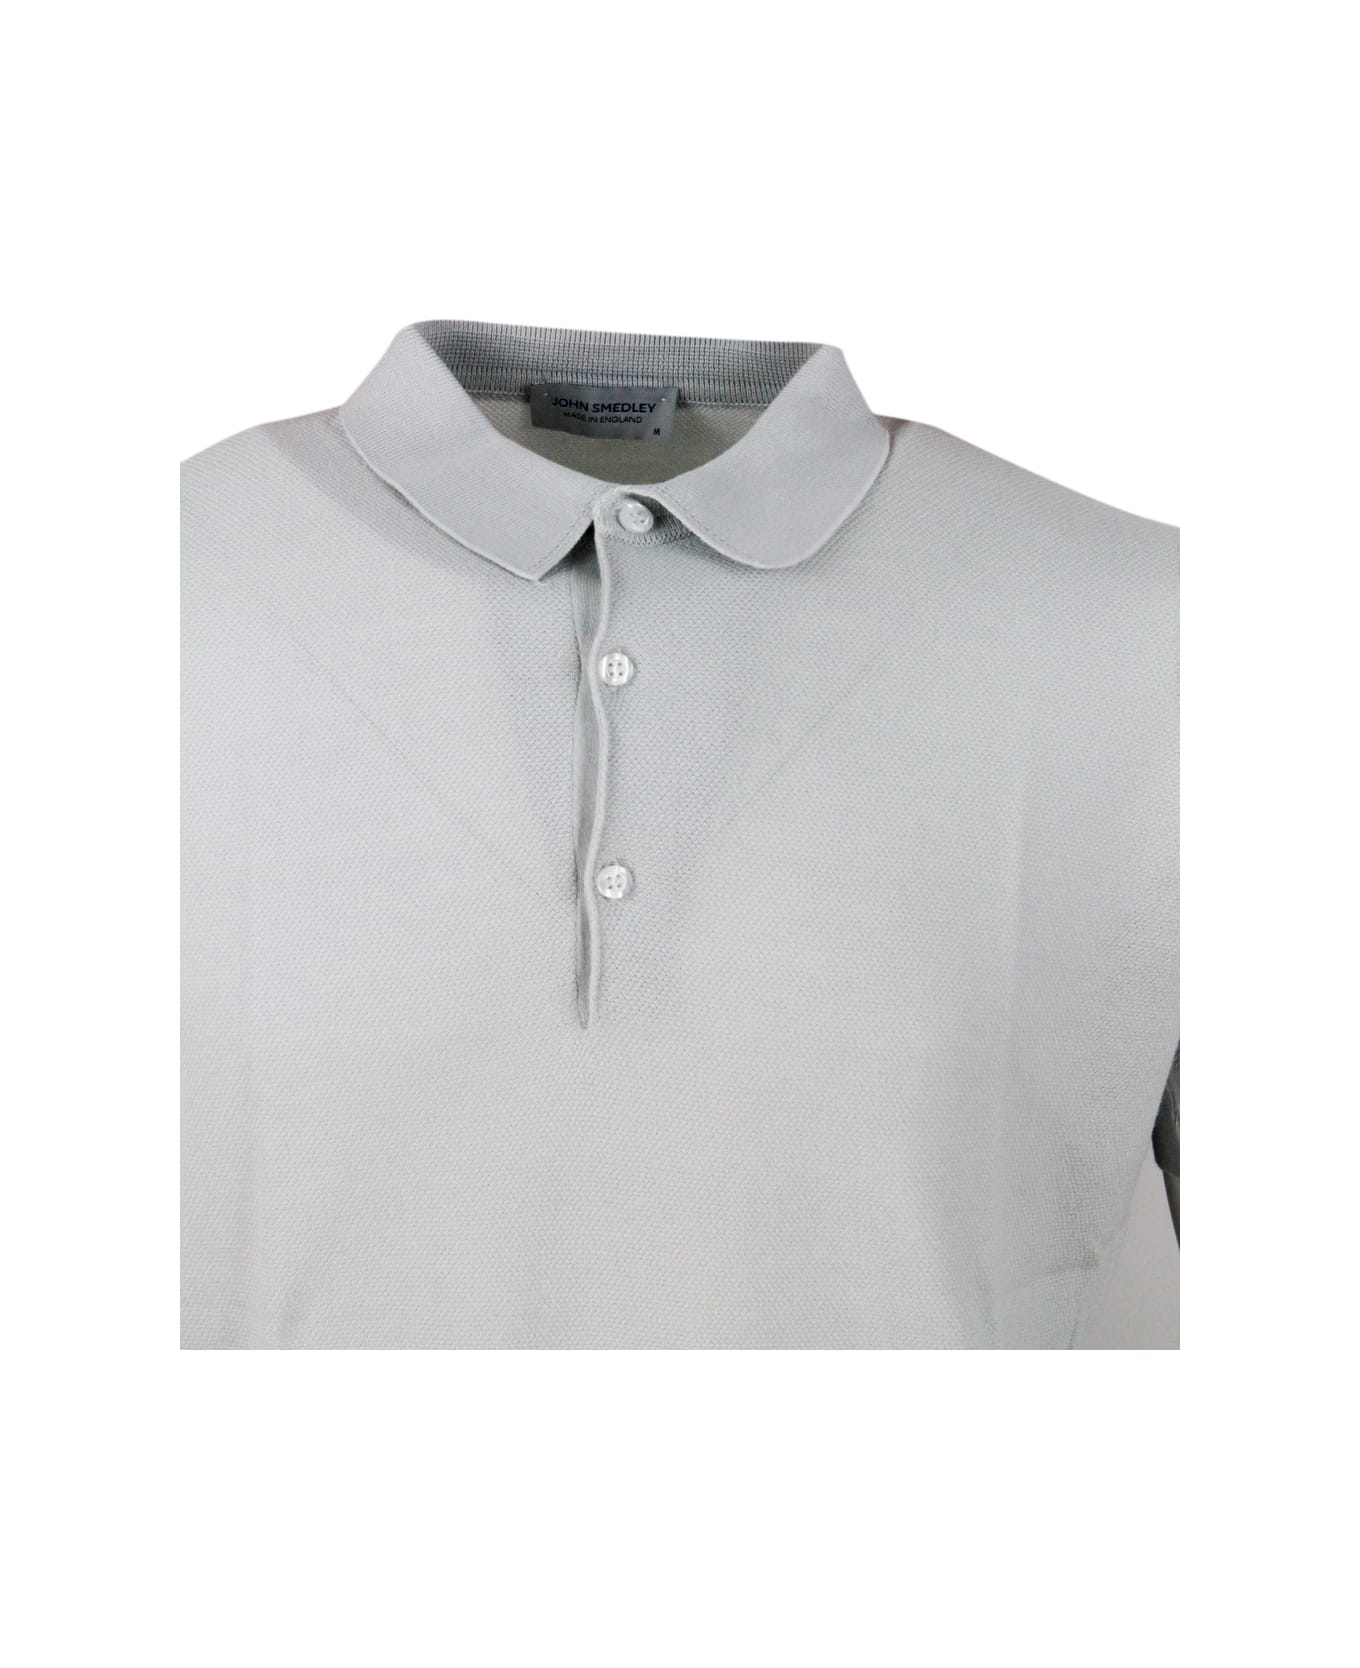 John Smedley Short-sleeved Polo Shirt In Extrafine Piqué Cotton Thread With Three Buttons - Grey